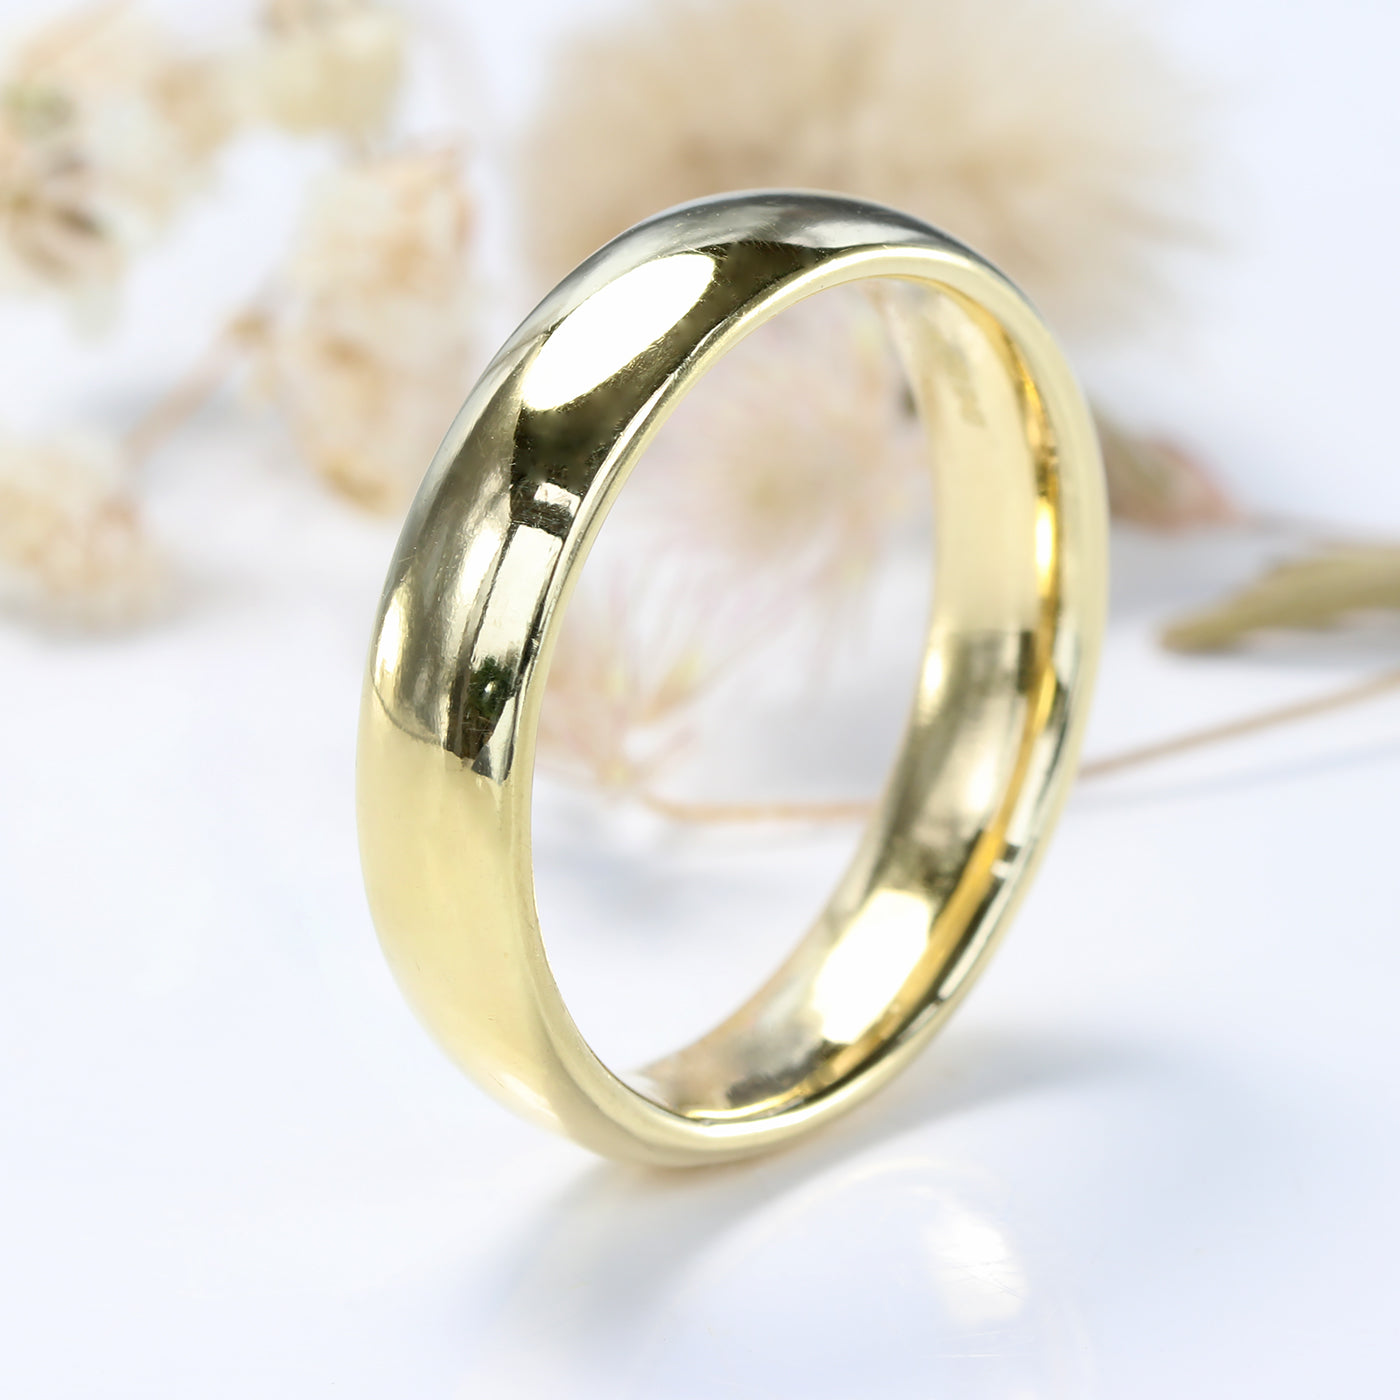 18ct Gold Polished 5mm Comfort Fit (Court) Wedding Ring